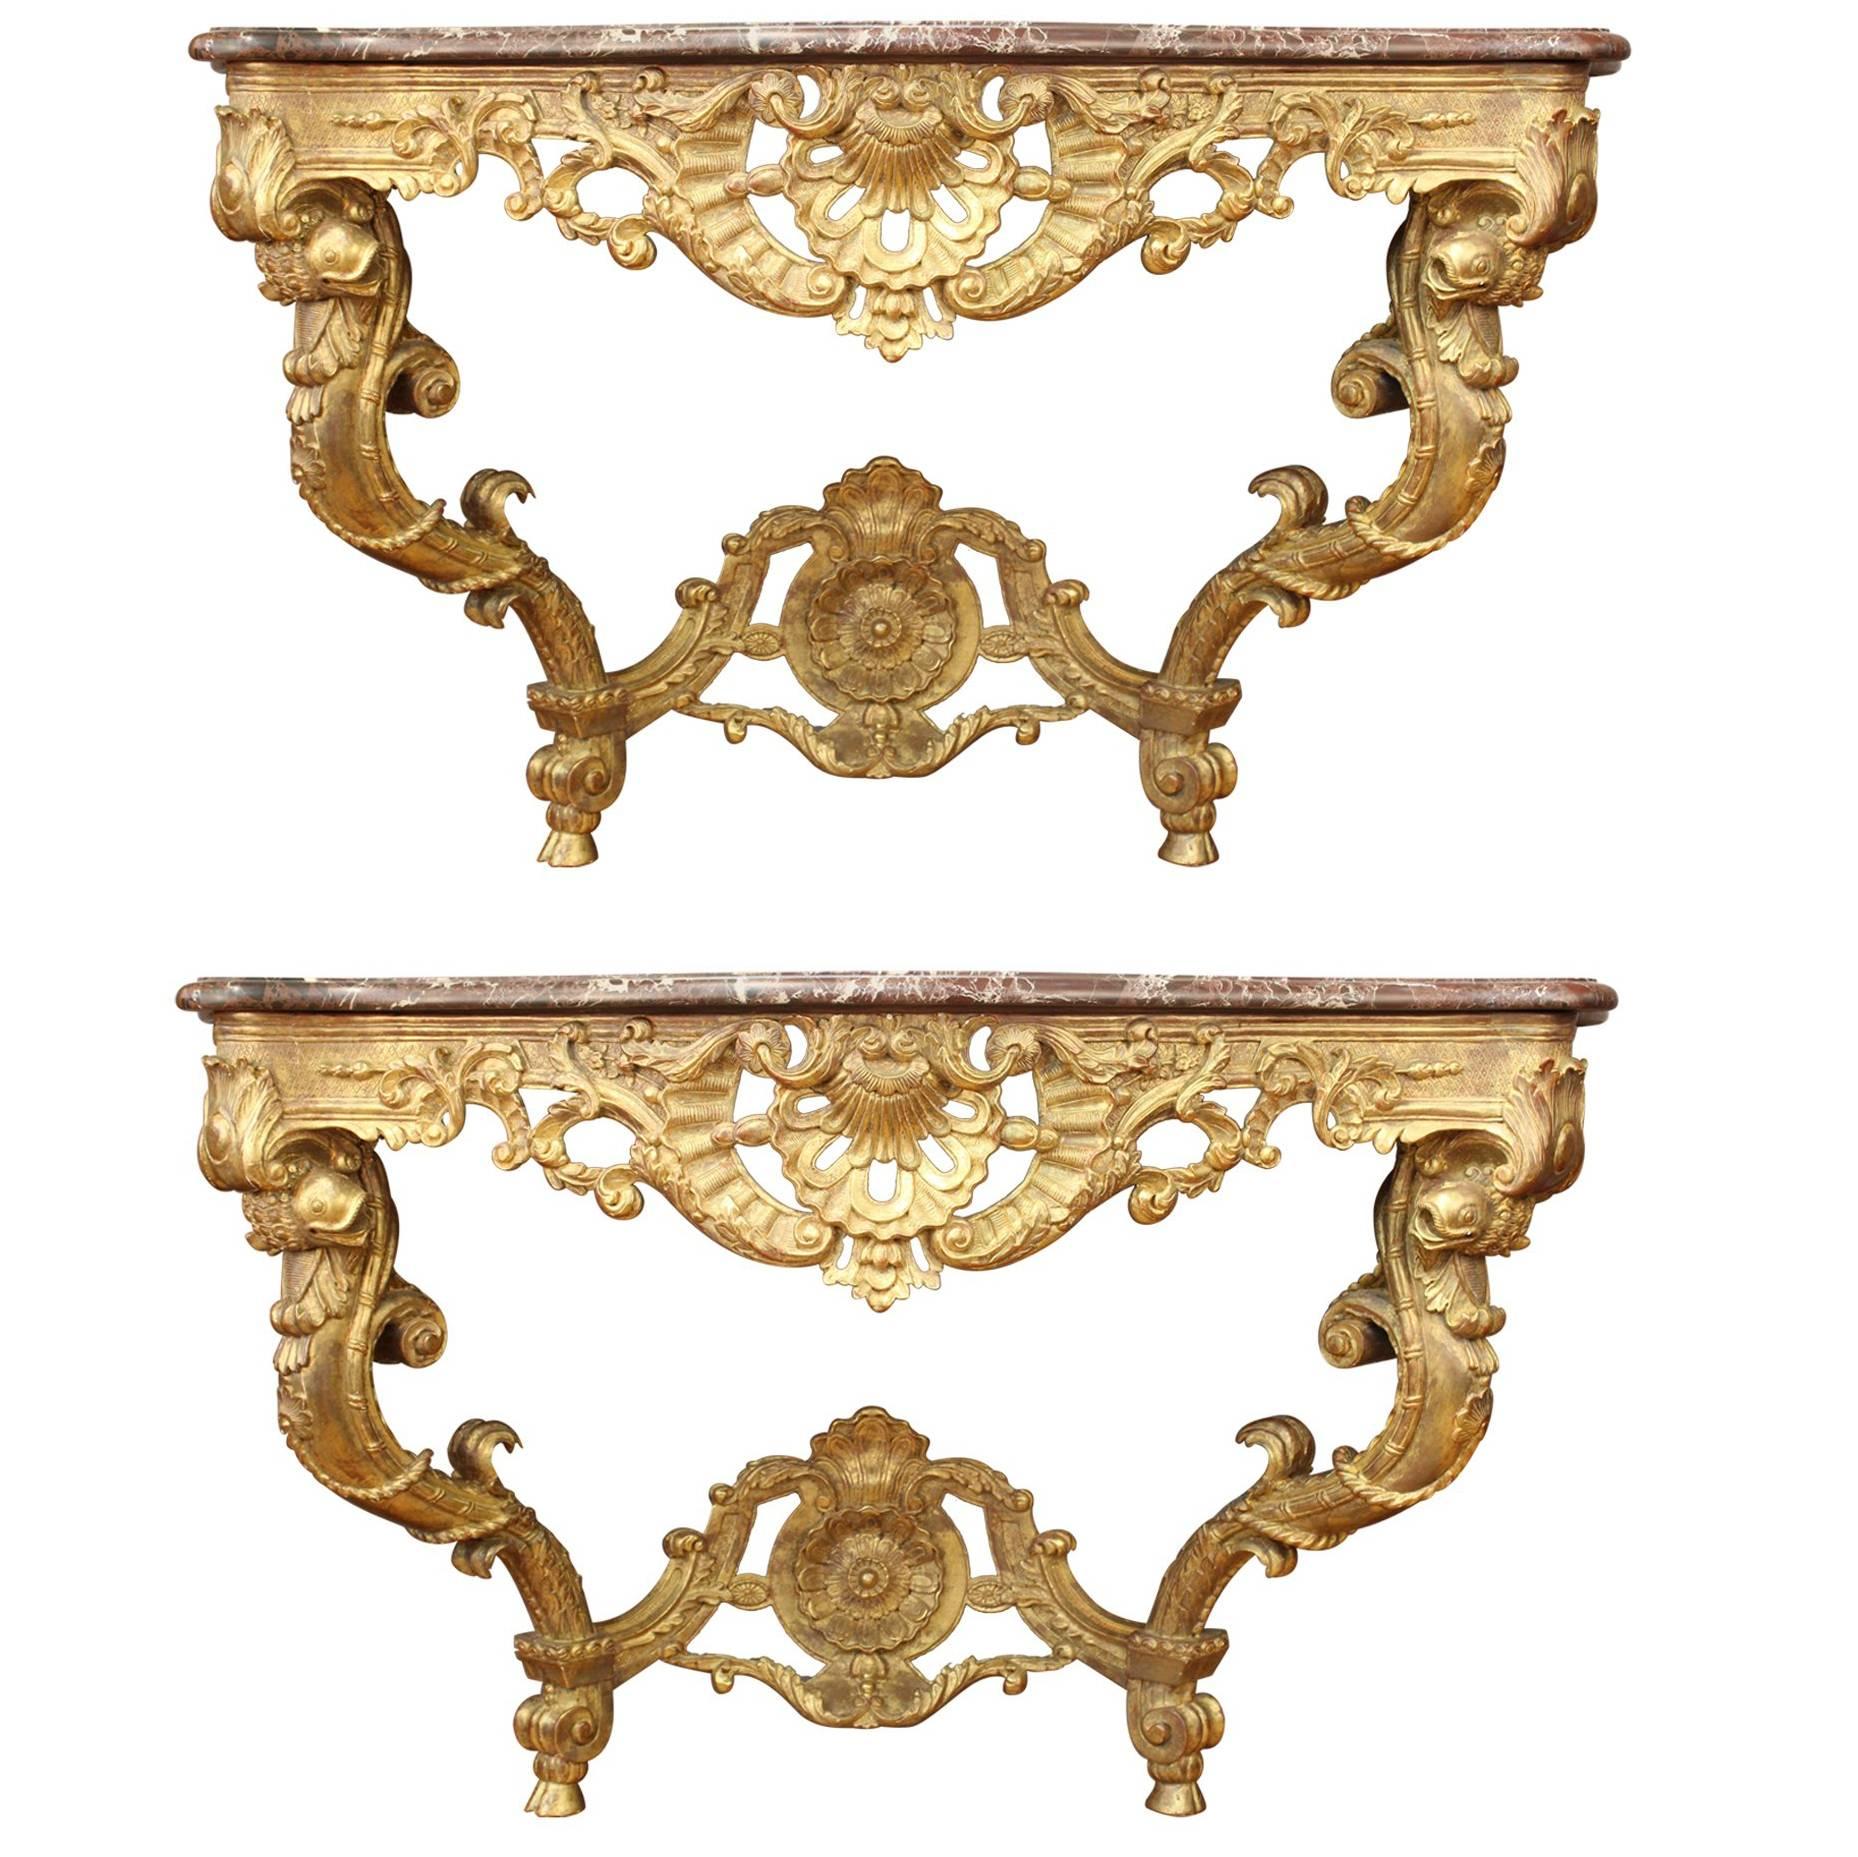 Pair of 19th Century French Rococo Style Consoles, late 19th-early 20th century